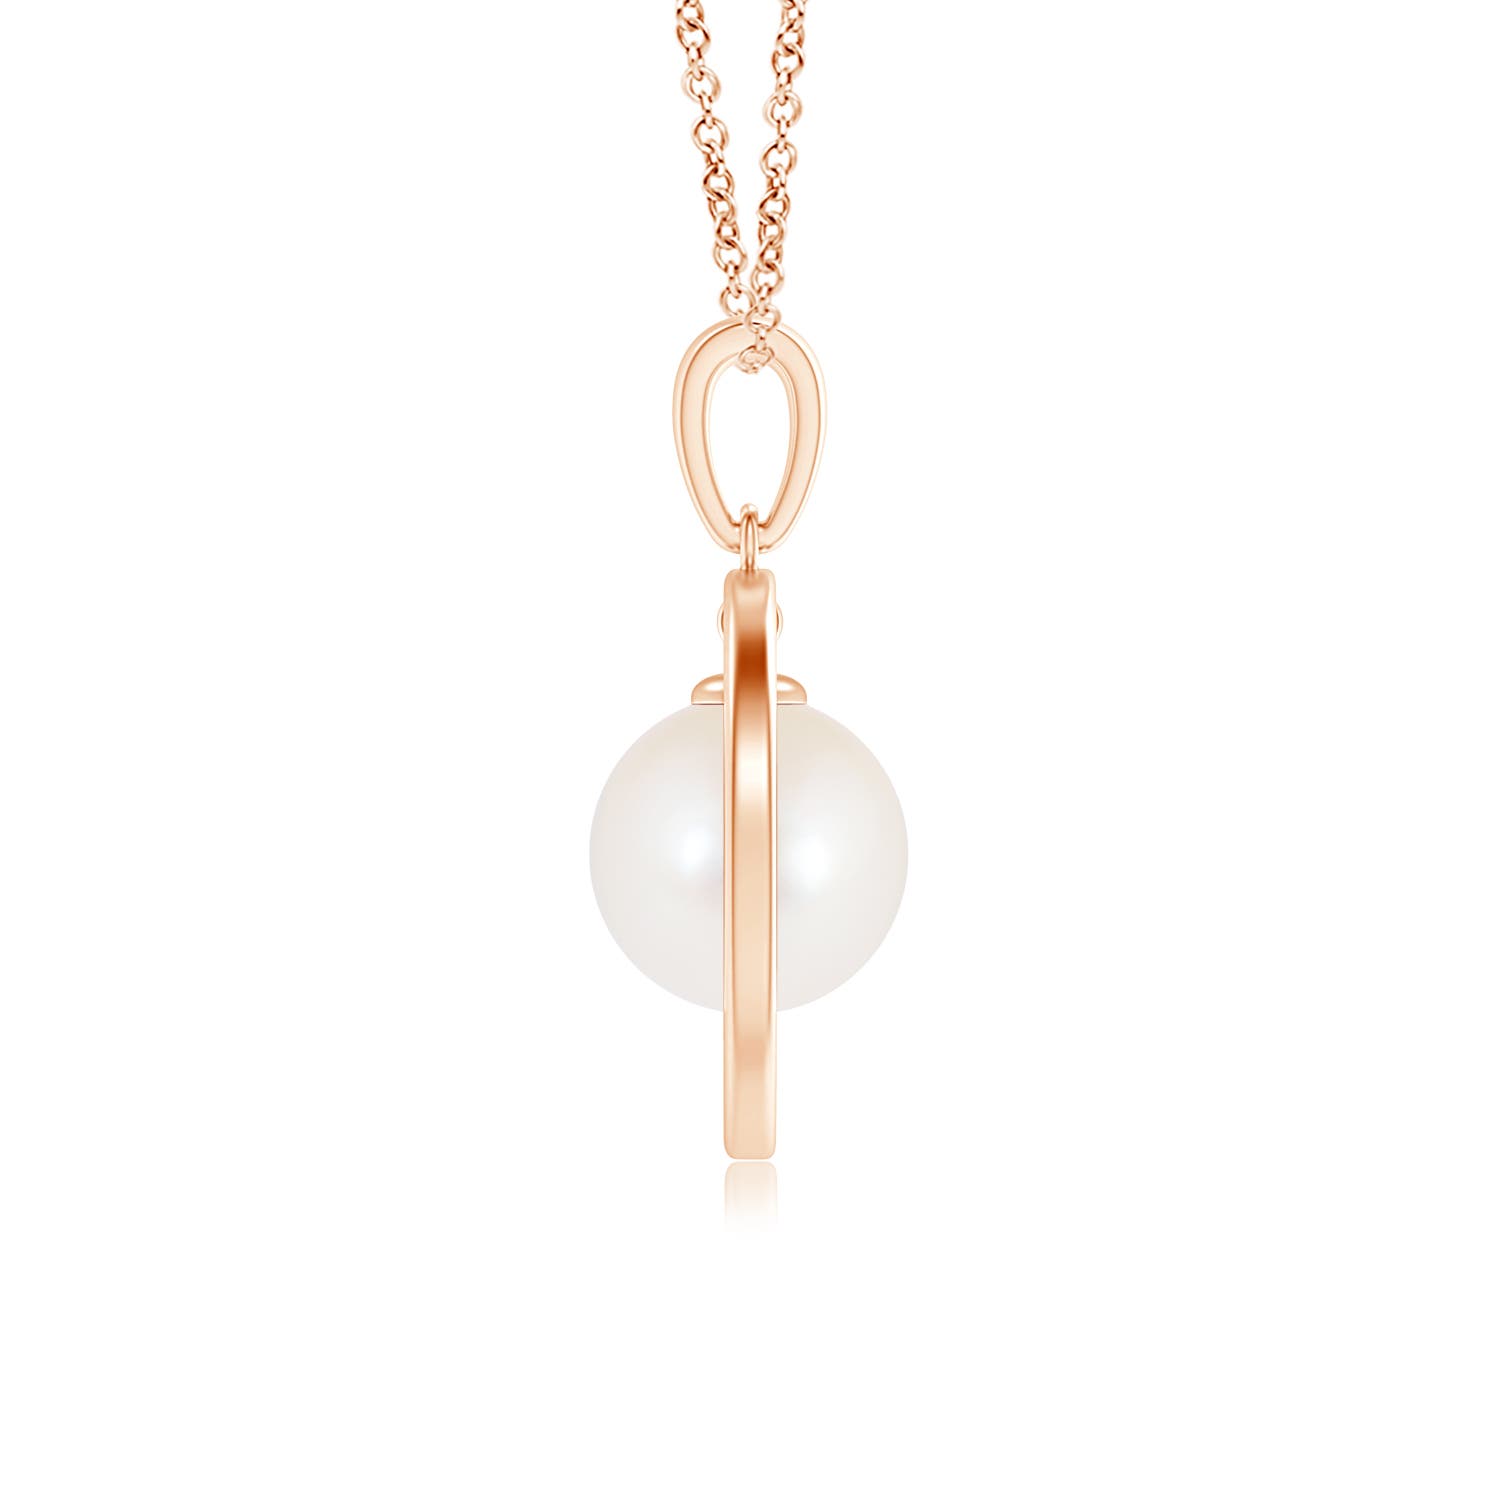 AAA - Freshwater Cultured Pearl / 3.7 CT / 14 KT Rose Gold